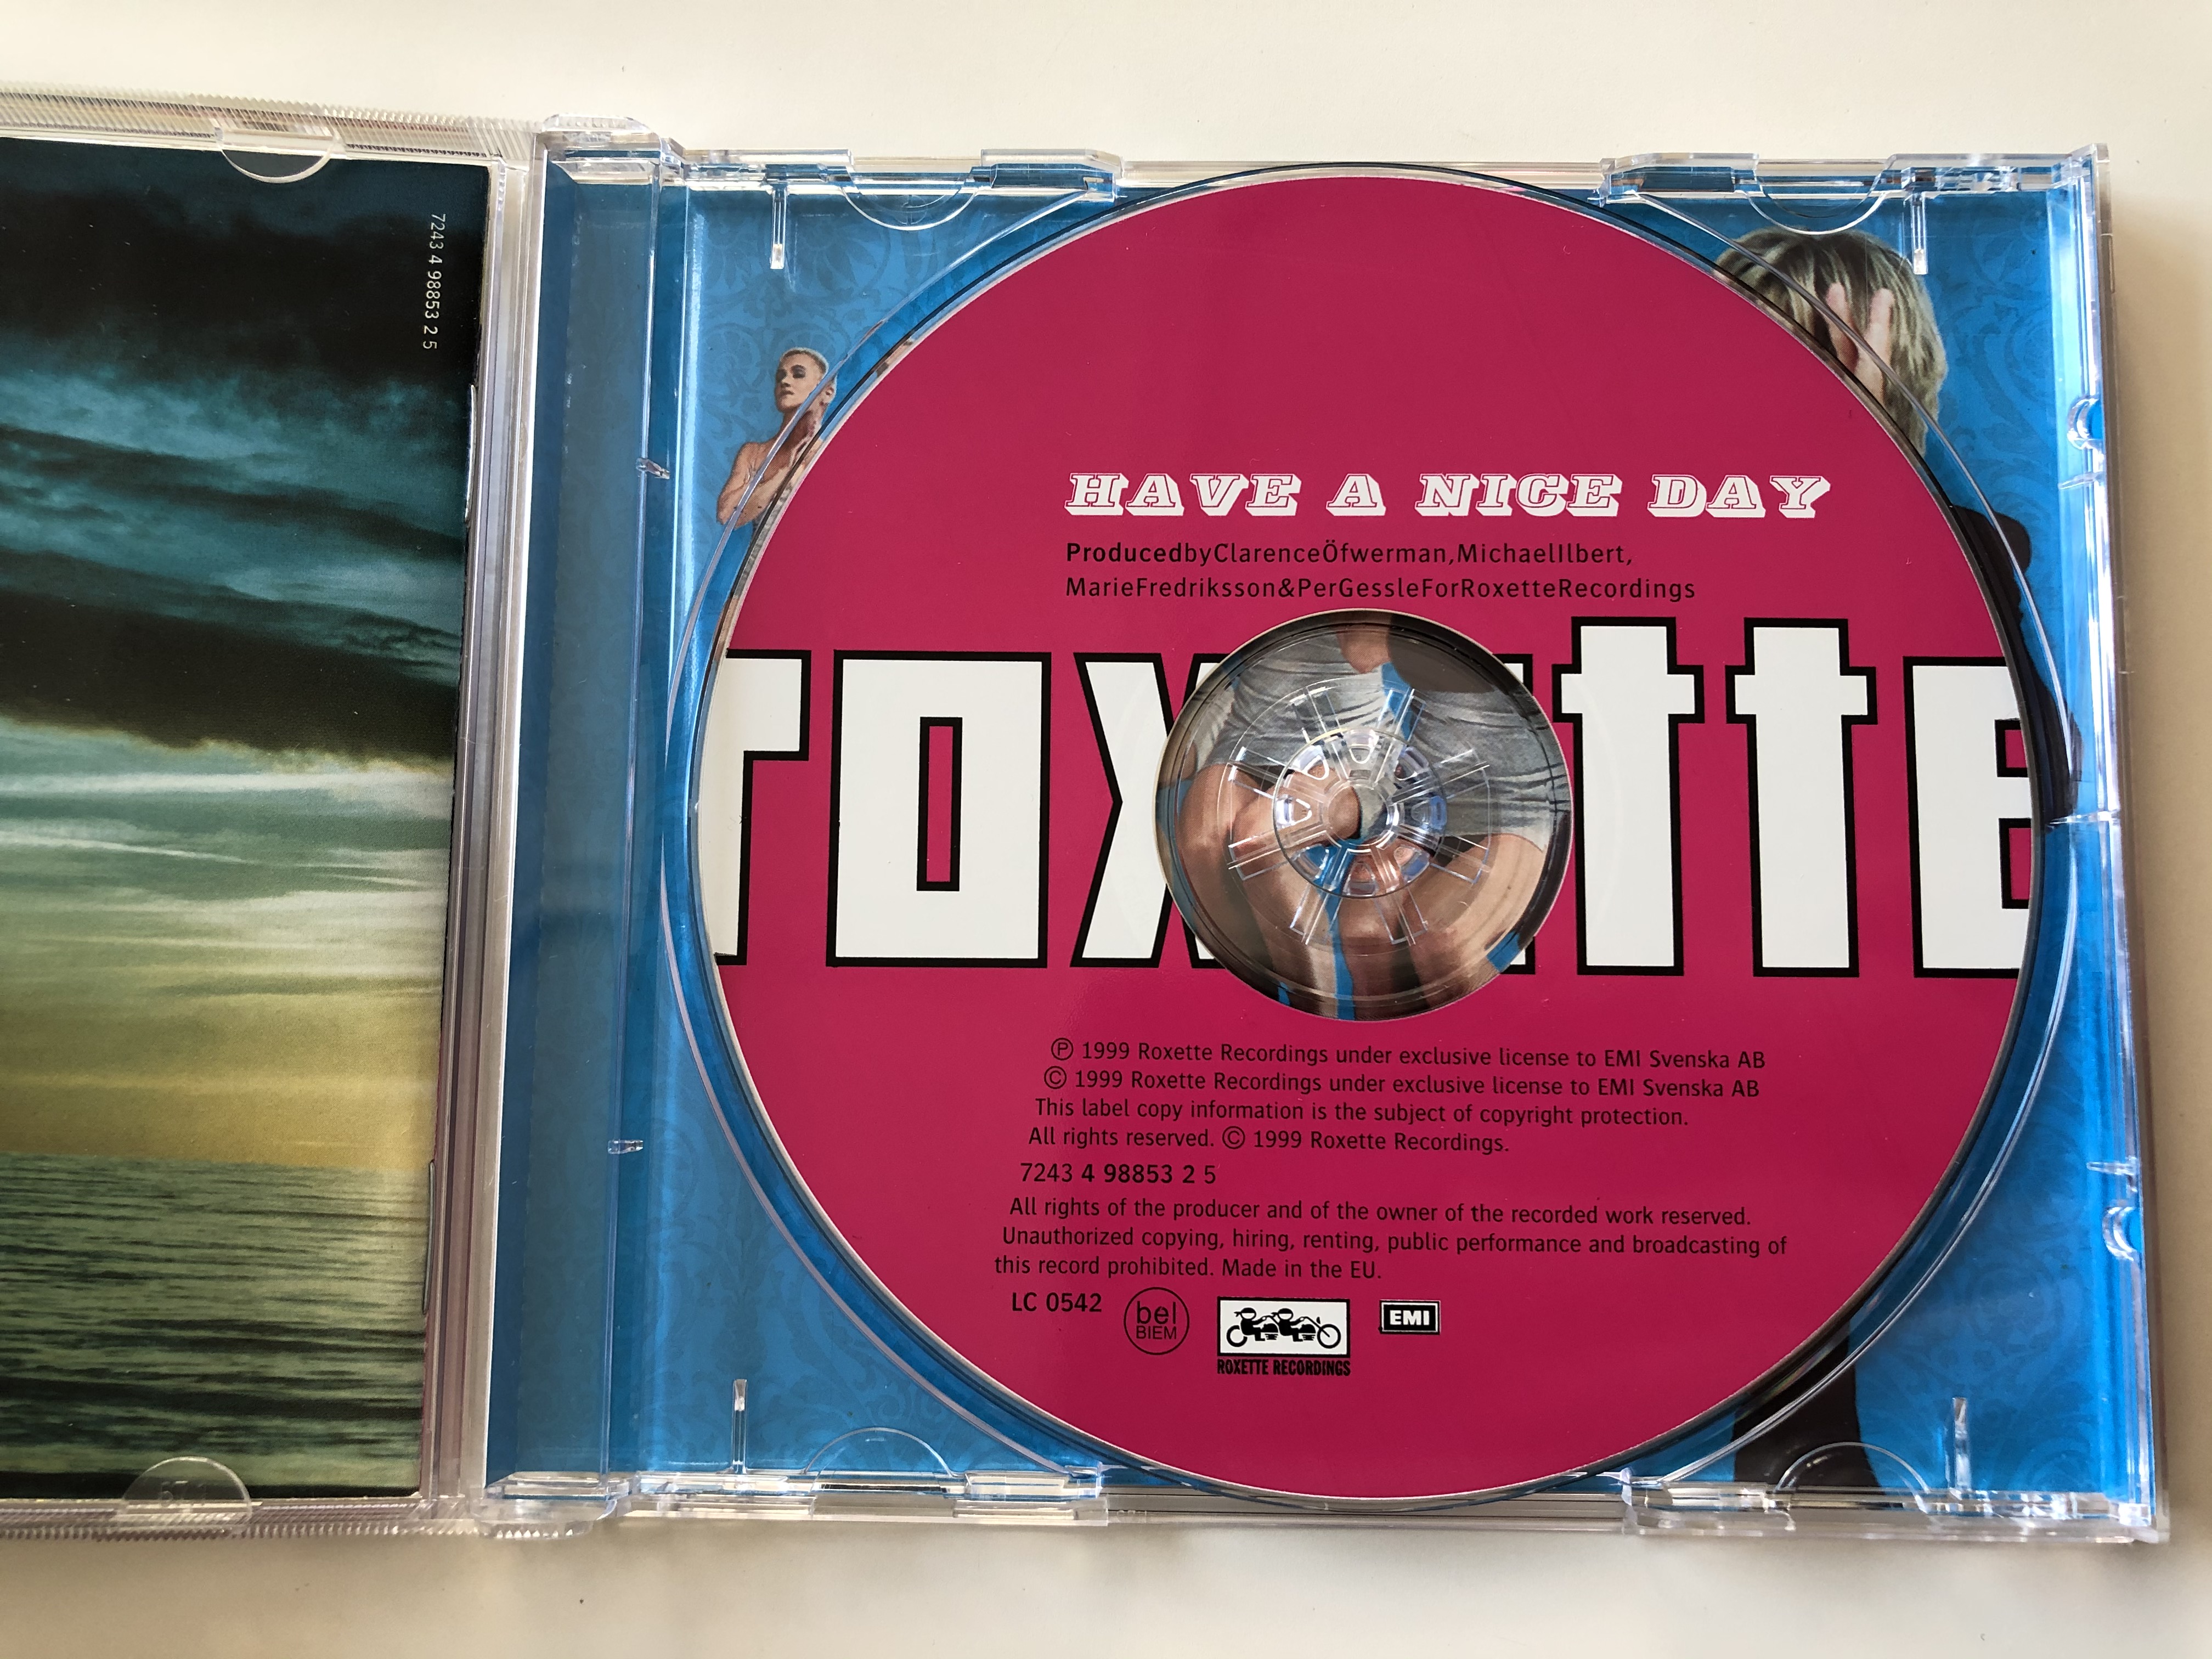 roxette-have-a-nice-day-roxette-recordings-audio-cd-1999-7243-4-98853-2-5-2-.jpg